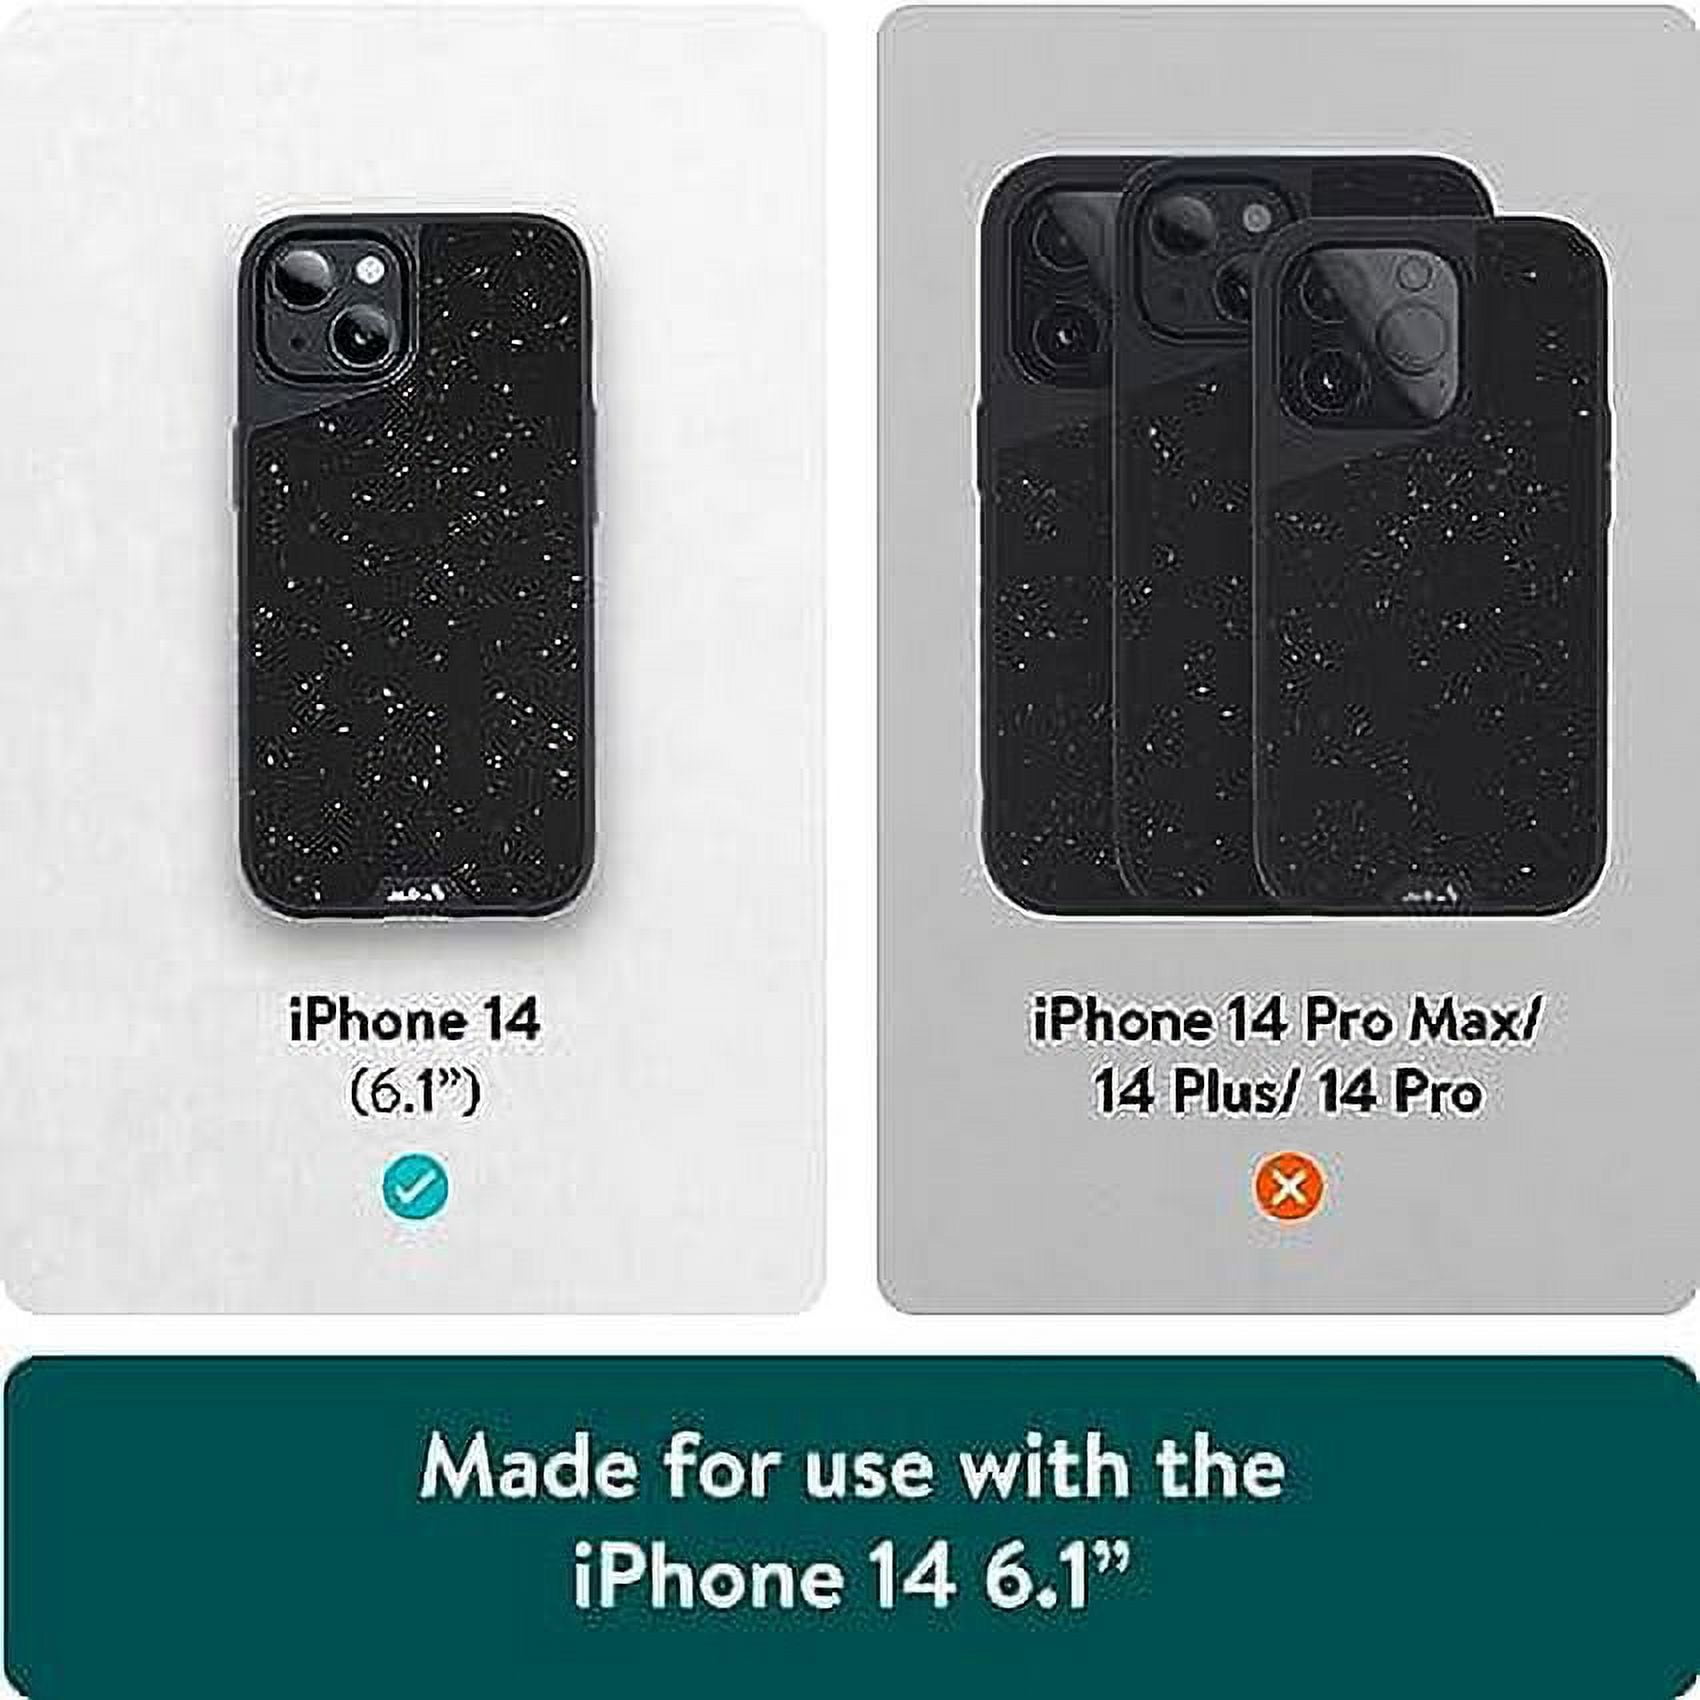  Mous - Protective Case for iPhone 12 Pro Max - Limitless 4.0 -  Aramid Fiber - Fully Compatible with Apple's MagSafe - Sustainable  Packaging : Cell Phones & Accessories